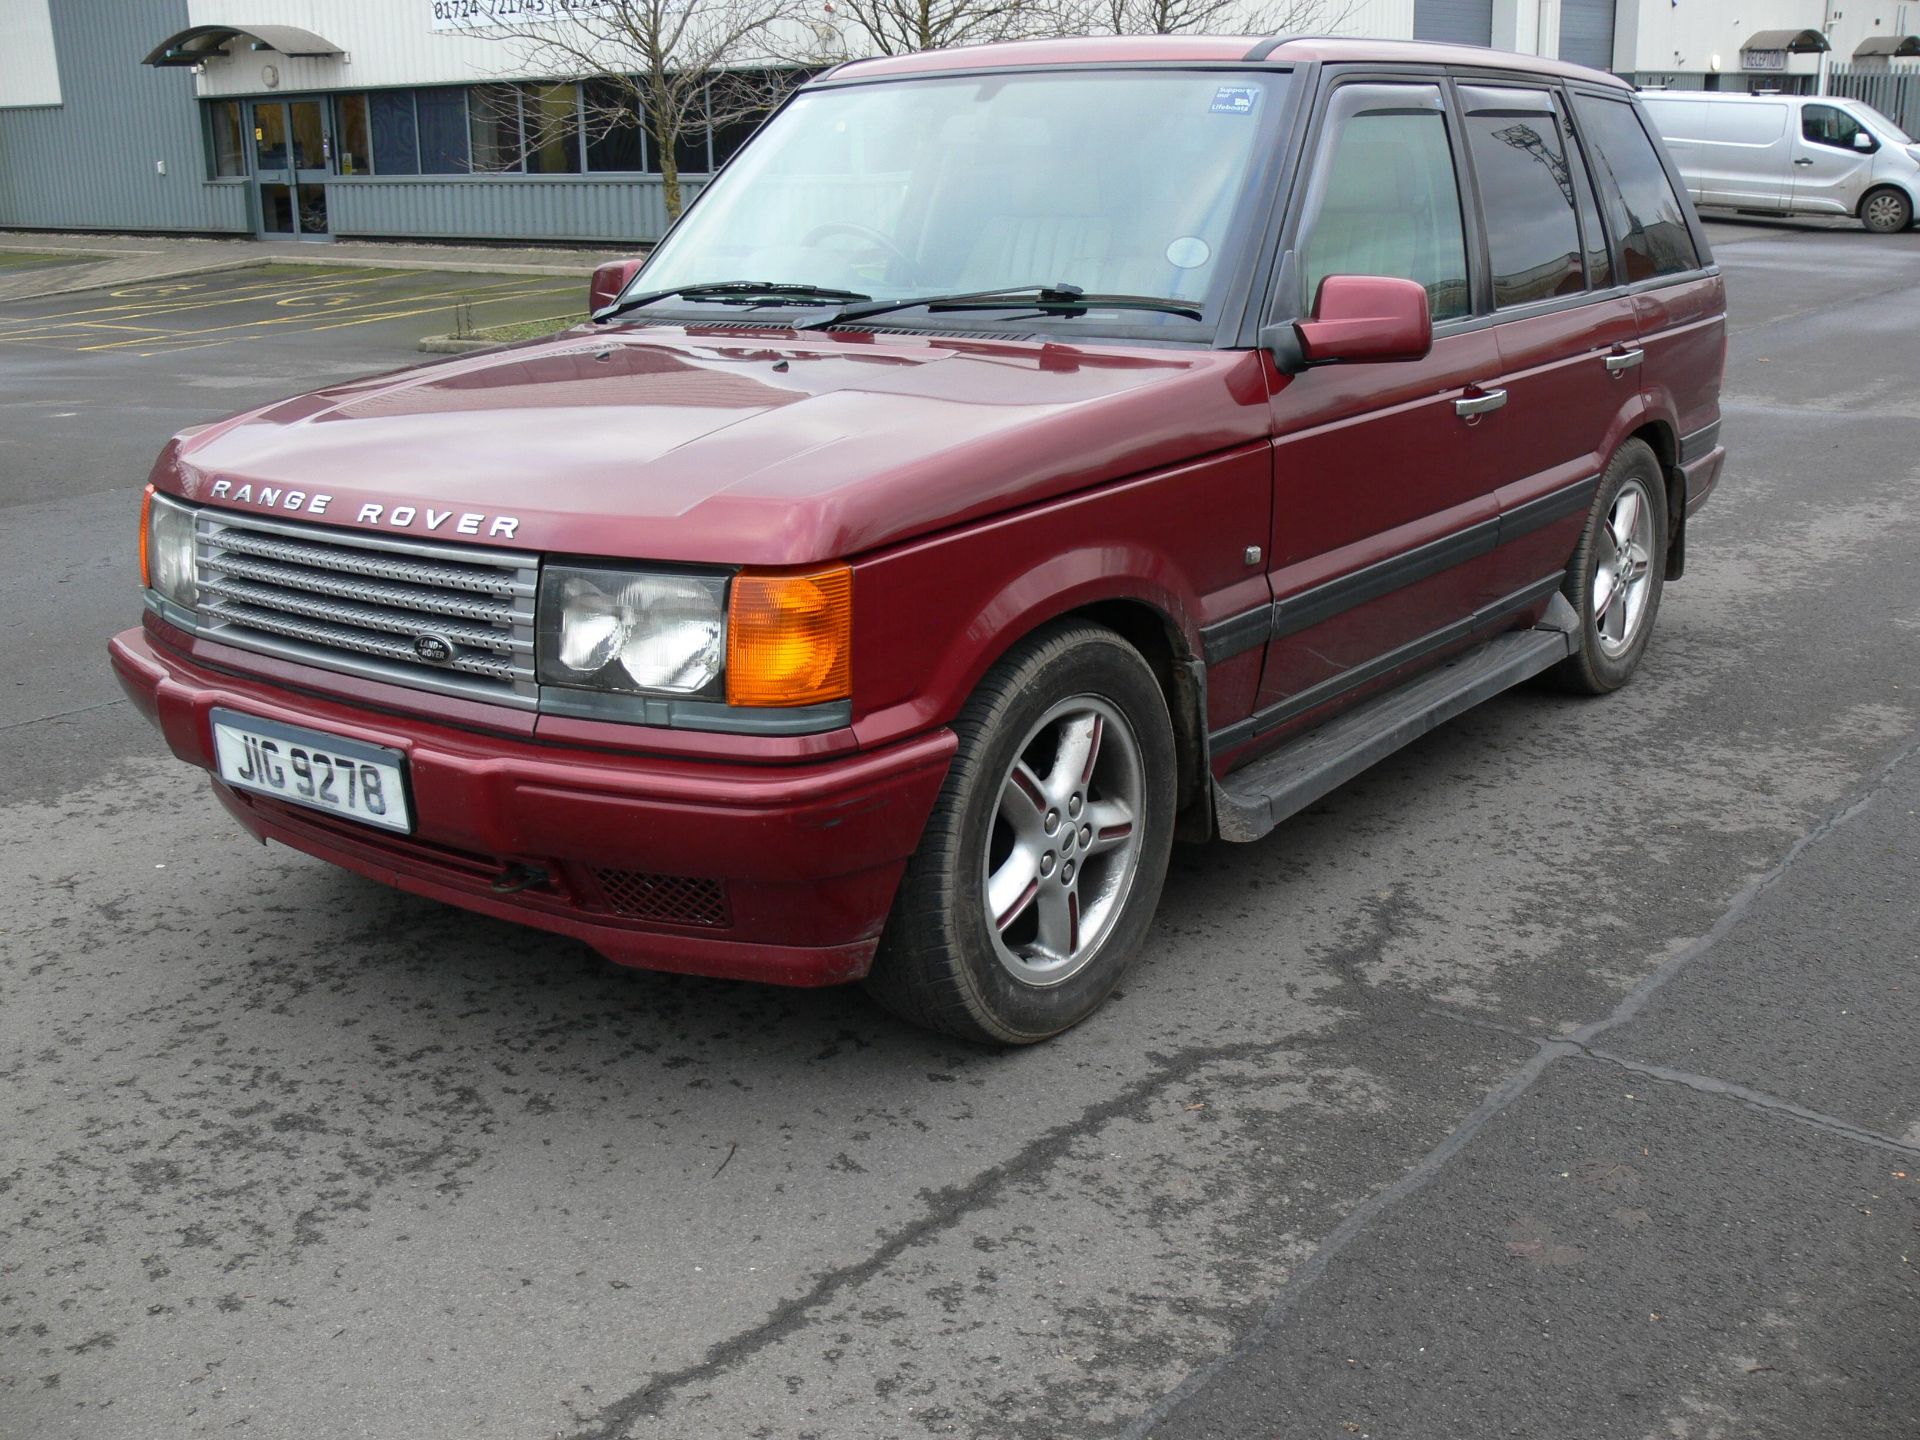 Land Rover Range Rover P38 automatic. Date of first registration 29/06/2001. Bordeaux limited